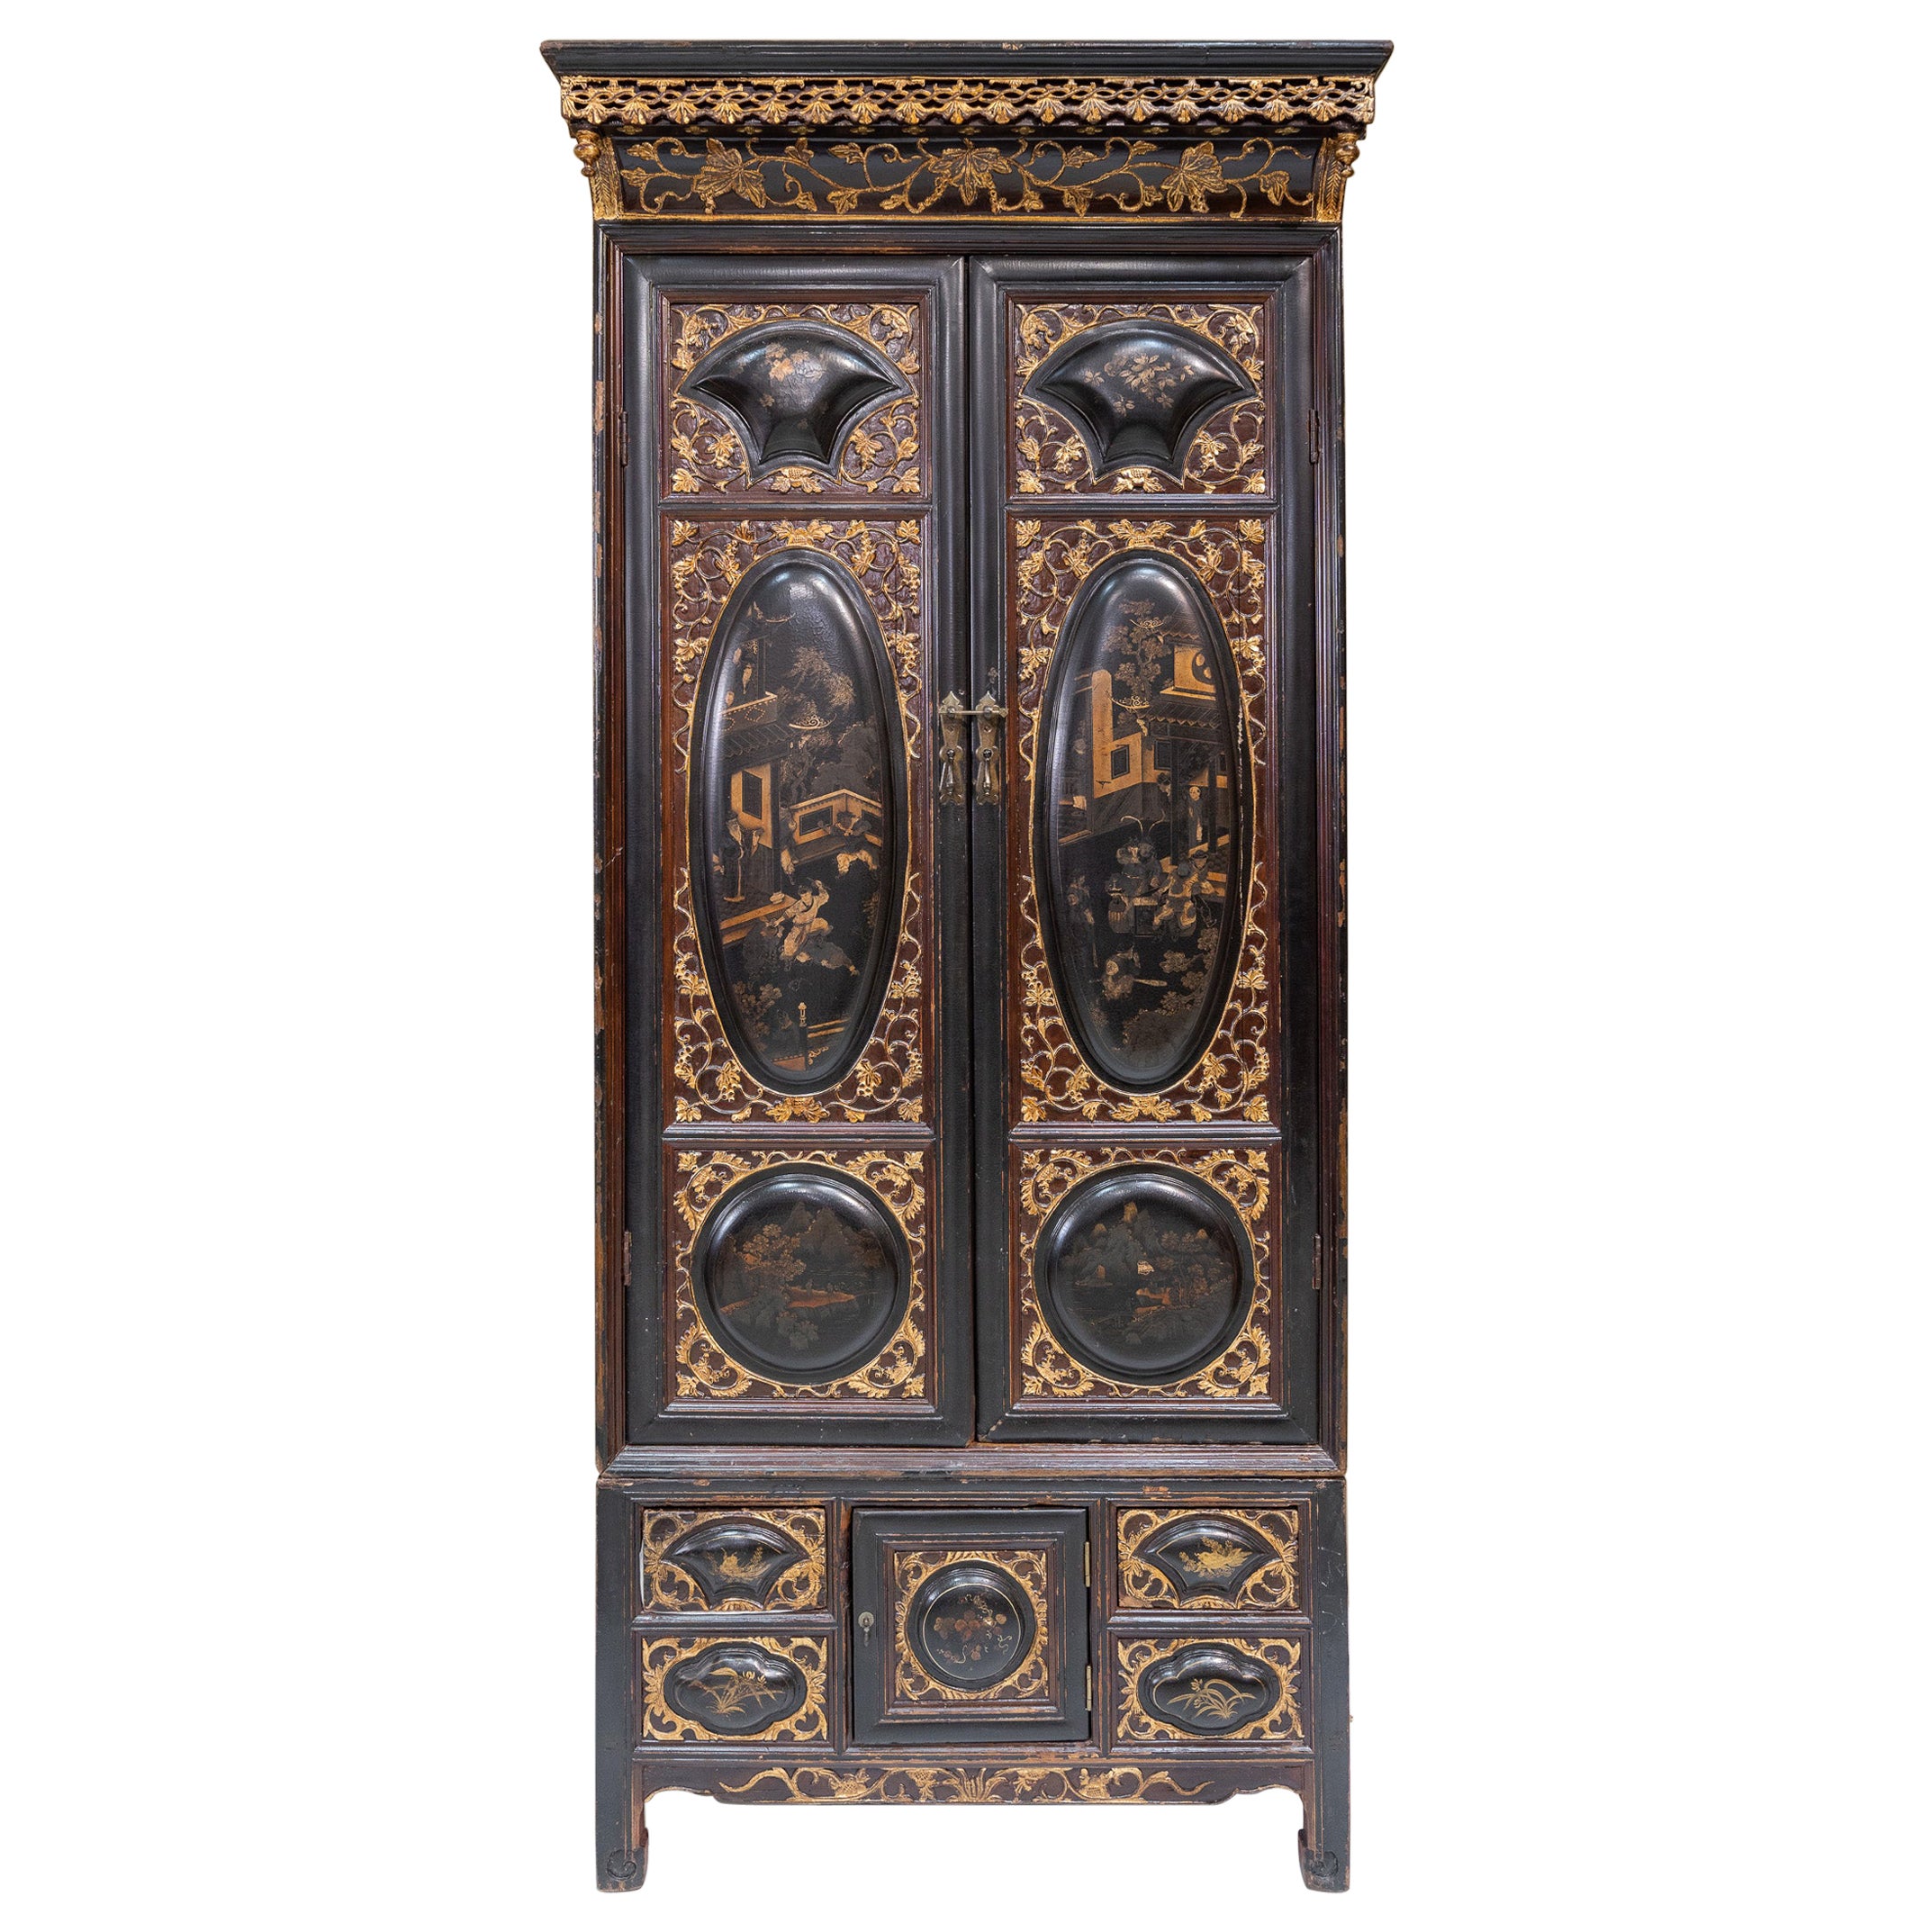 Vintage Black Lacquered Wardrobe from Chaozhou, China